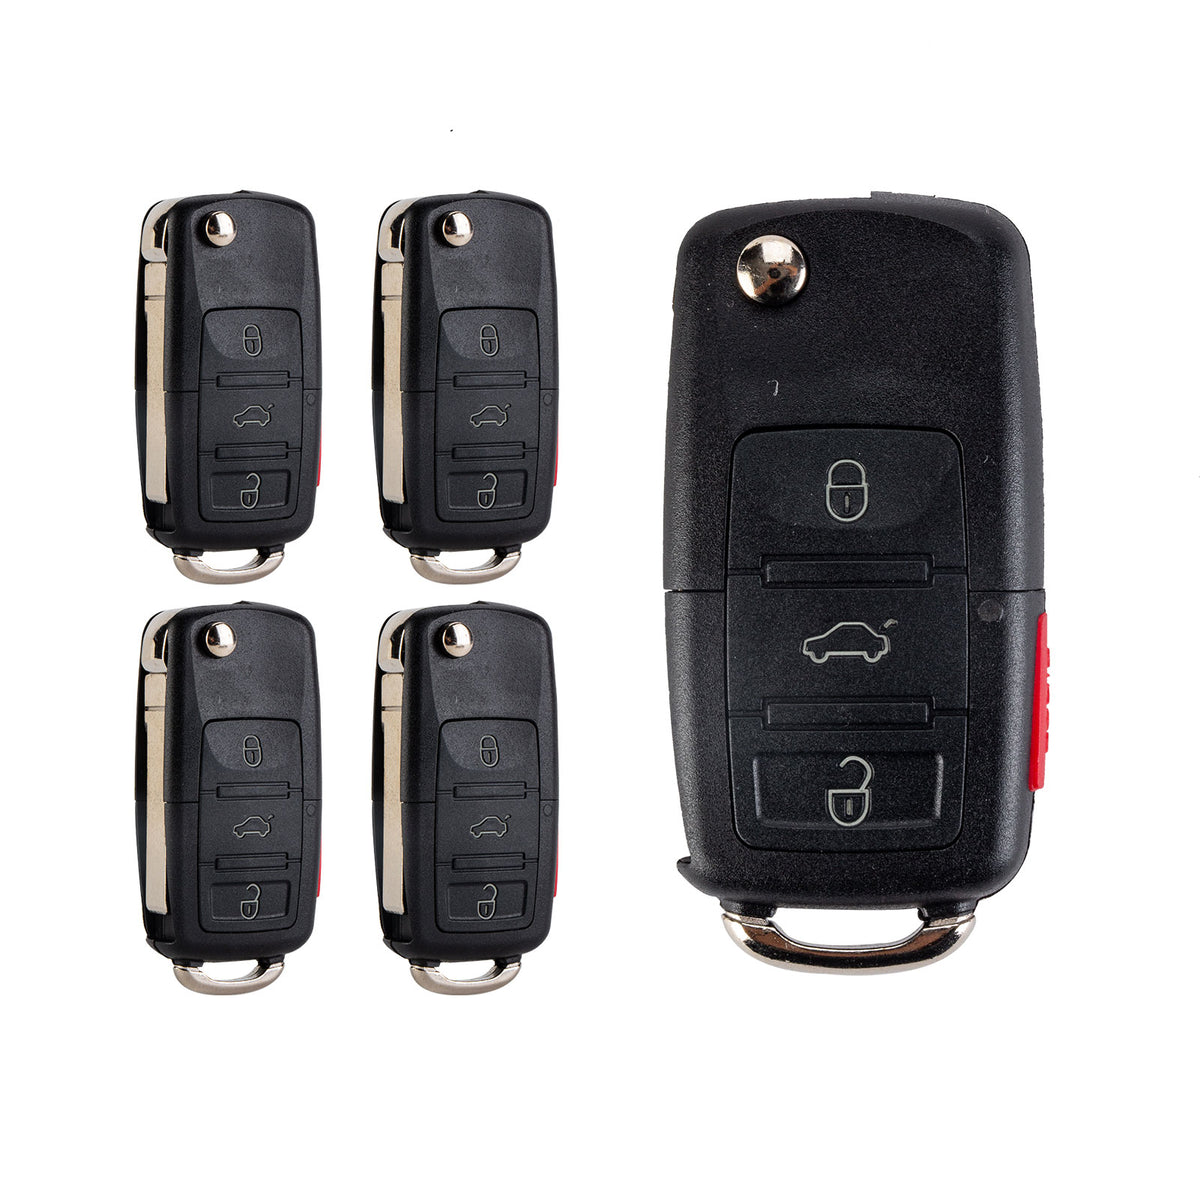 Lots of 5 Extra-Partss Smart Remote Car Key Fob Replacement for Audi NBG009272T 8P0837220E fits 2007 2008 2009 2010 A3 TT